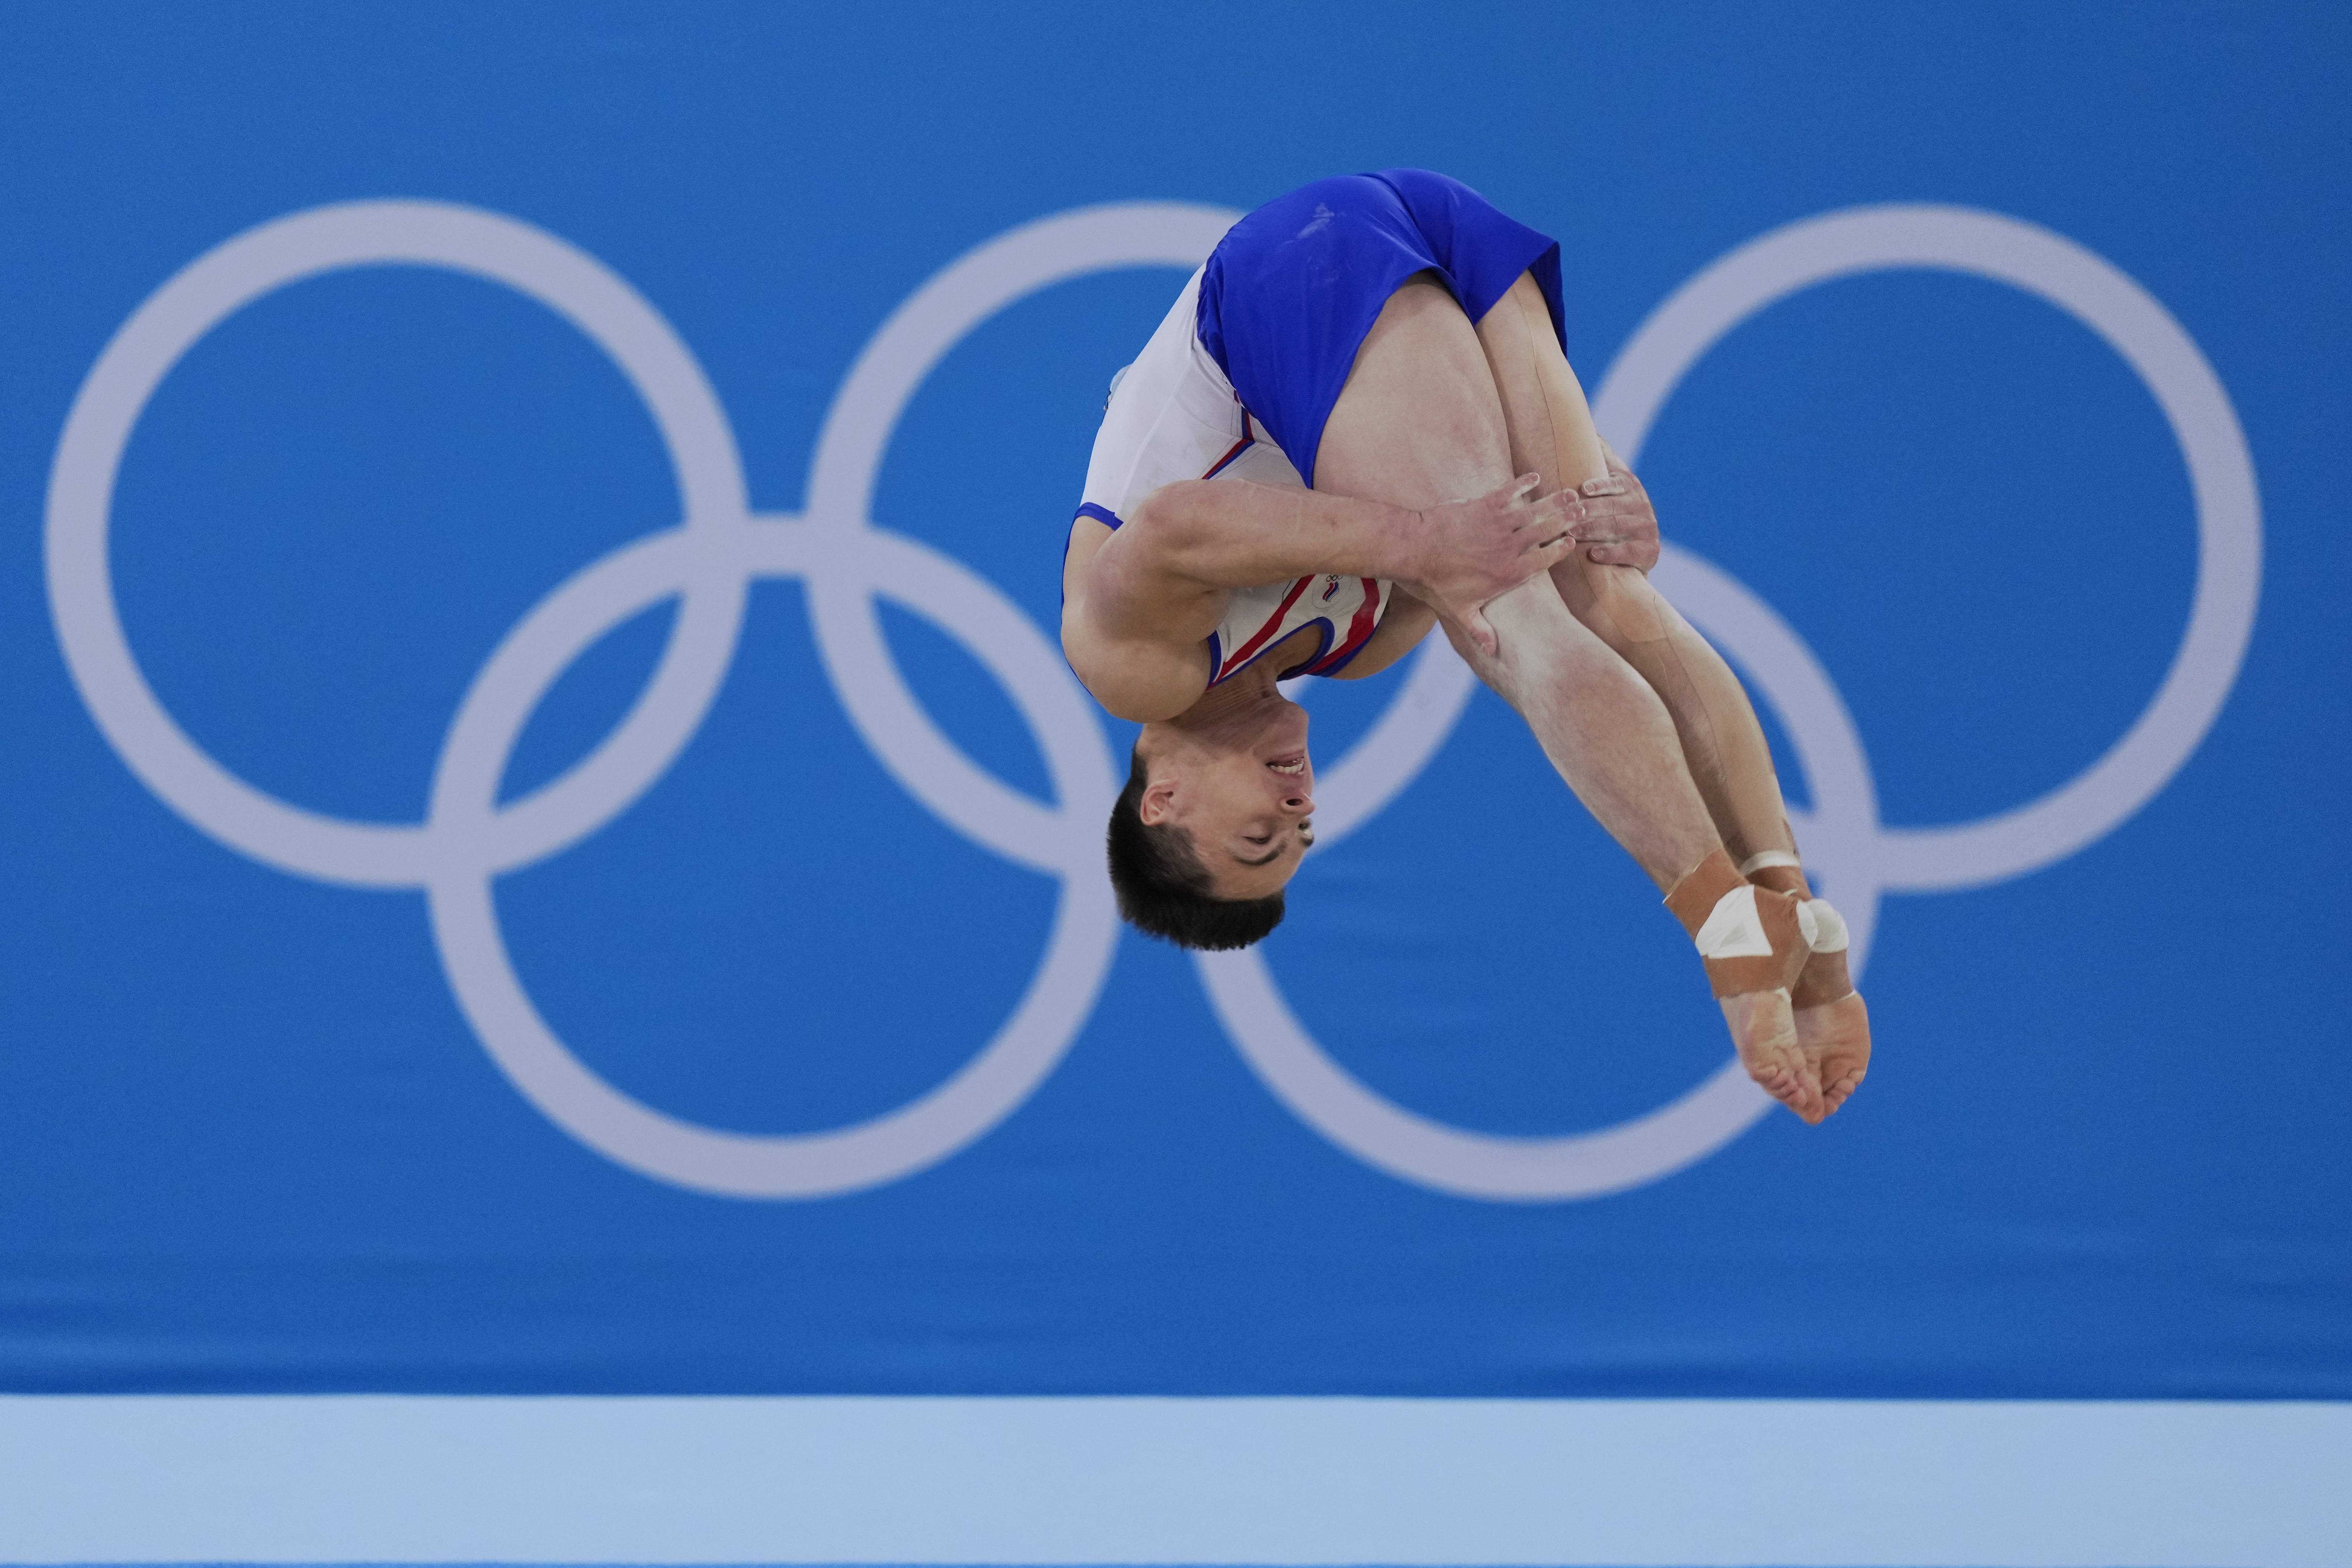 FILE - Nikita Nagornyy, of the Russian Olympic Committee, performs on the floor during the artistic gymnastic men's all-around final at the 2020 Summer Olympics, Wednesday, July 28, 2021, in Tokyo. A year out from the Paris Olympics, and nearly a year and a half since Russia's full-scale invasion of Ukraine, officials governing the many sports on the Olympic program are still split on how to treat Russian athletes. (AP Photo/Gregory Bull, File)